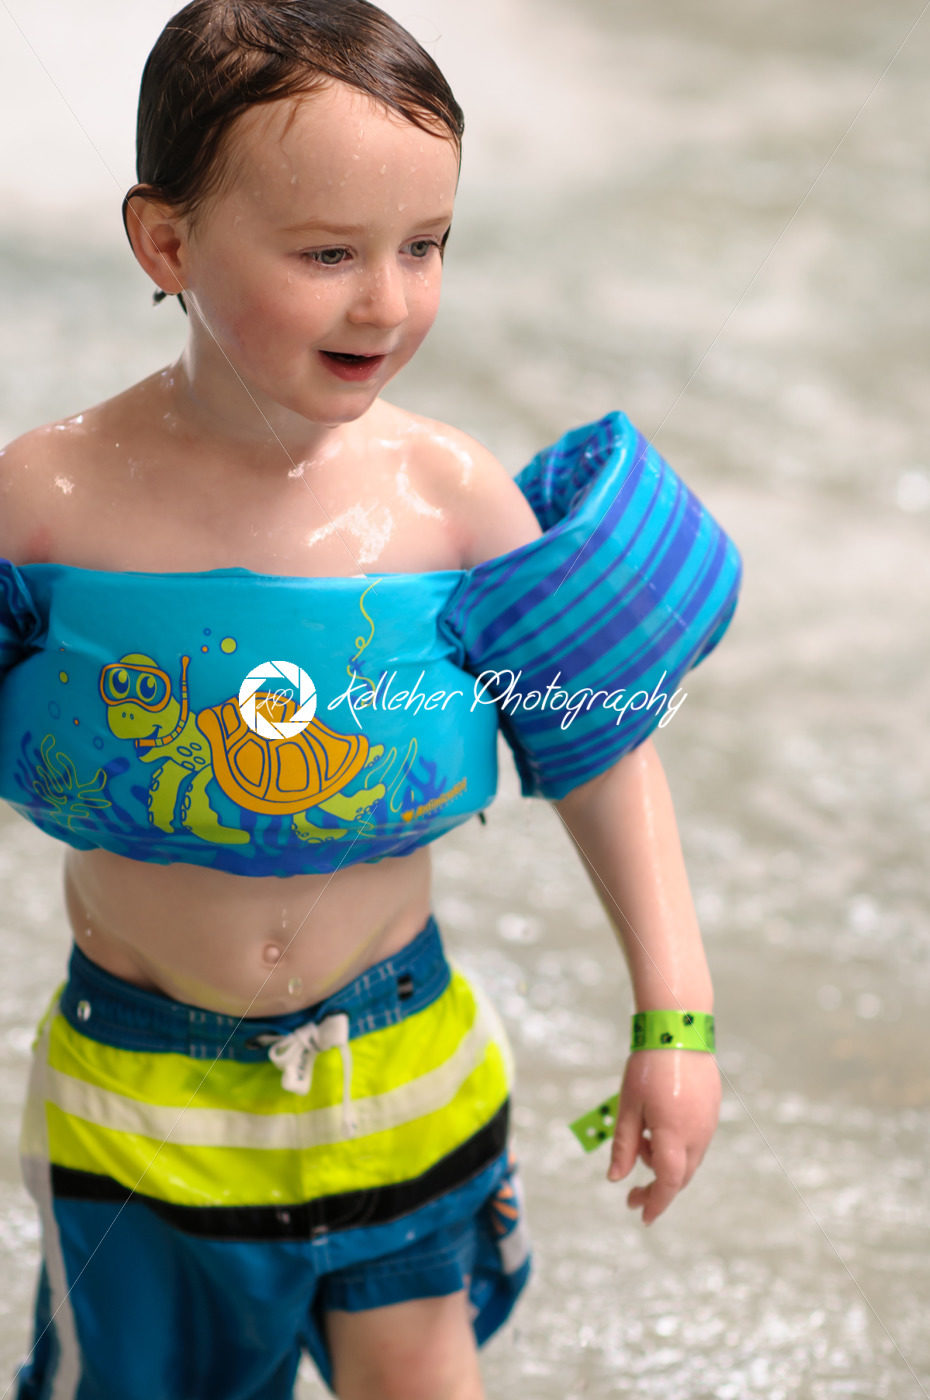 Little boy swimming in indoor pool - Kelleher Photography Store